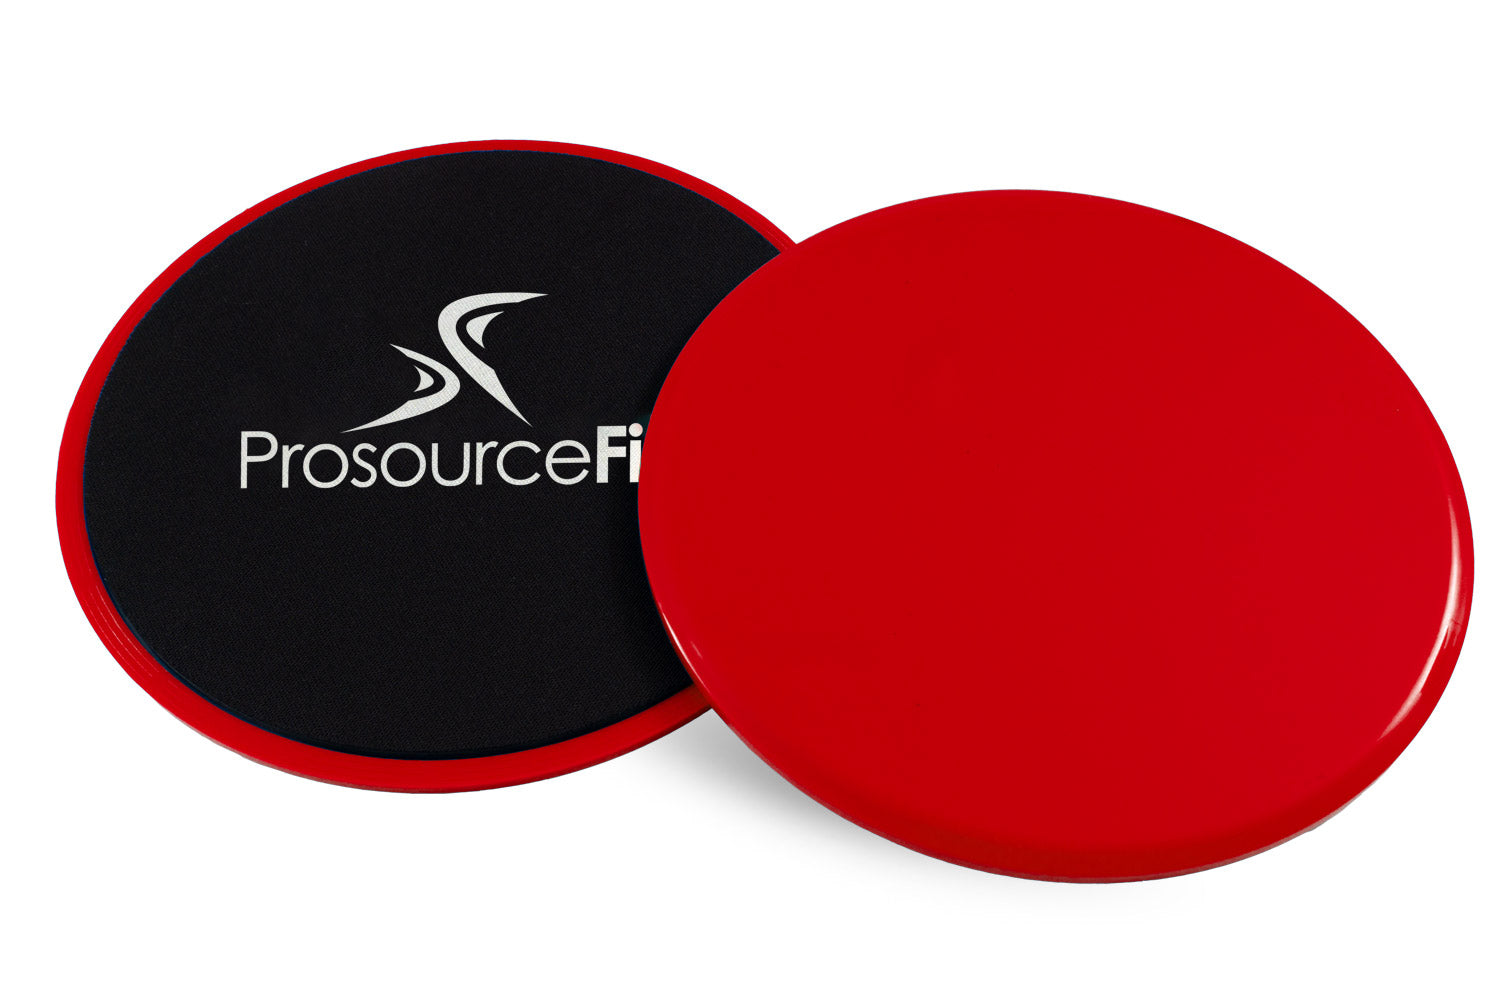 Exercise Core Sliders, Gliding Discs is Designed with Floating